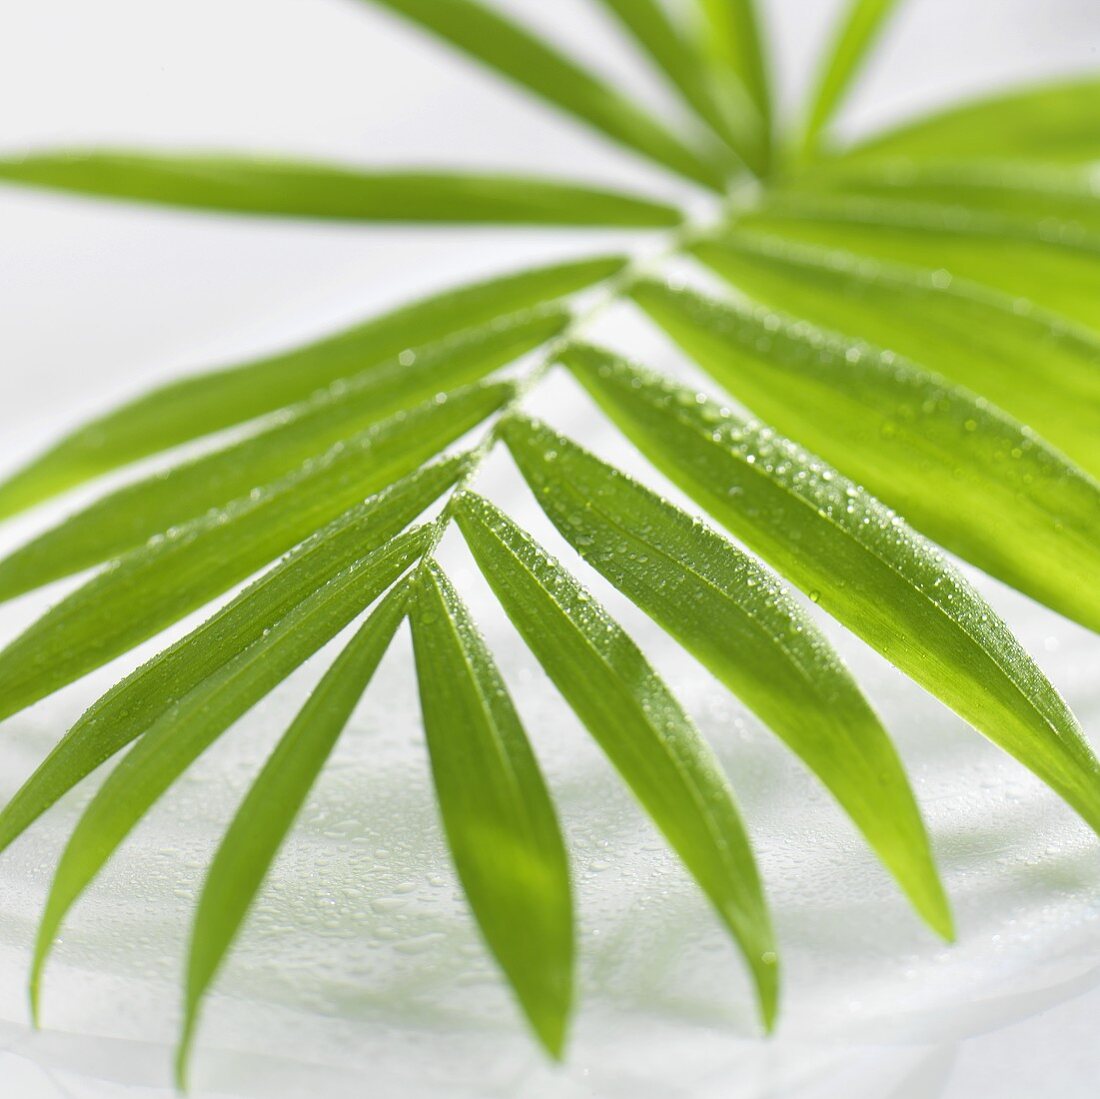 Fan palm leaf with drops of water (detail)